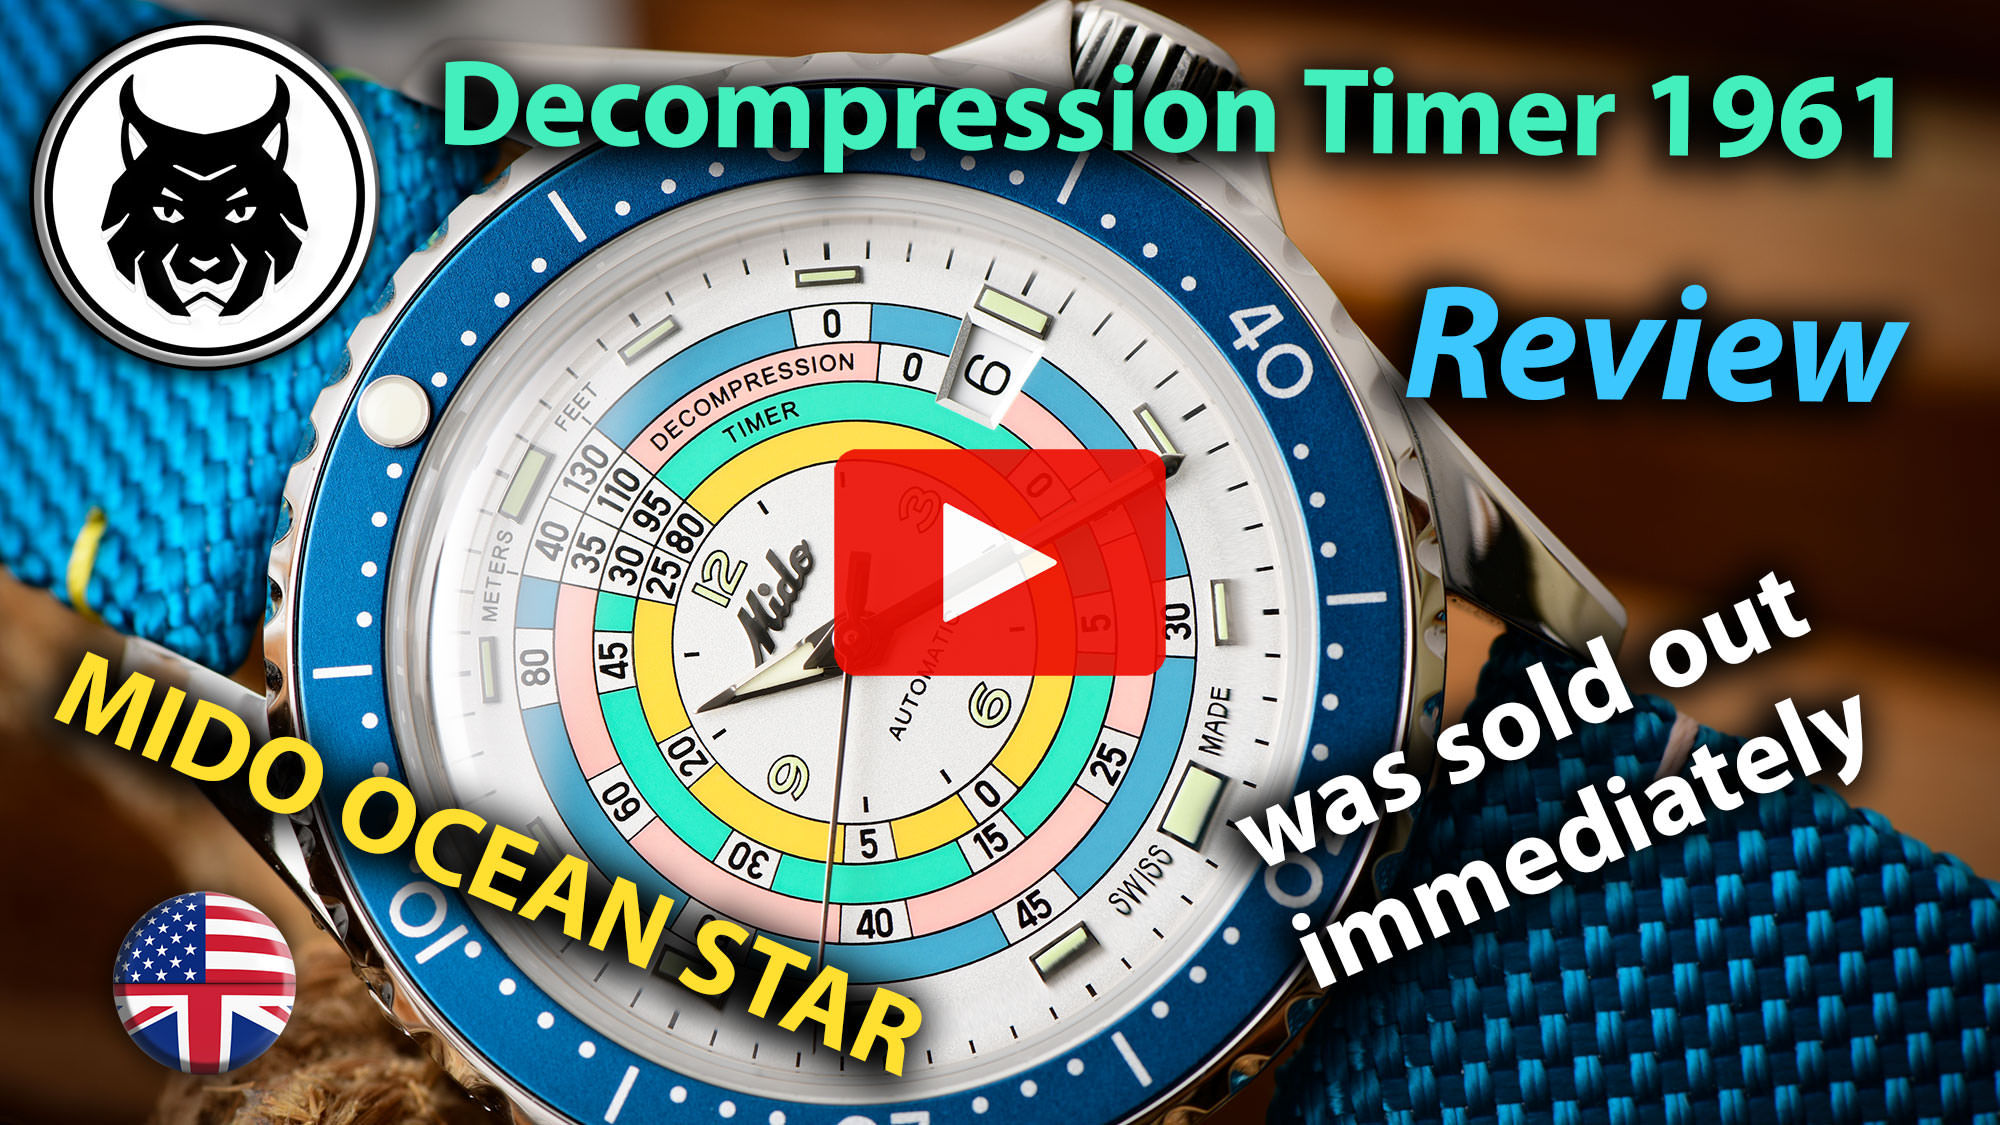 Short YouTube Video Review with hands on, wrist roll with all 3 bracelets, Lume, details, ... - Mido Ocean Star Decompression Timer 1961 Limited Edition